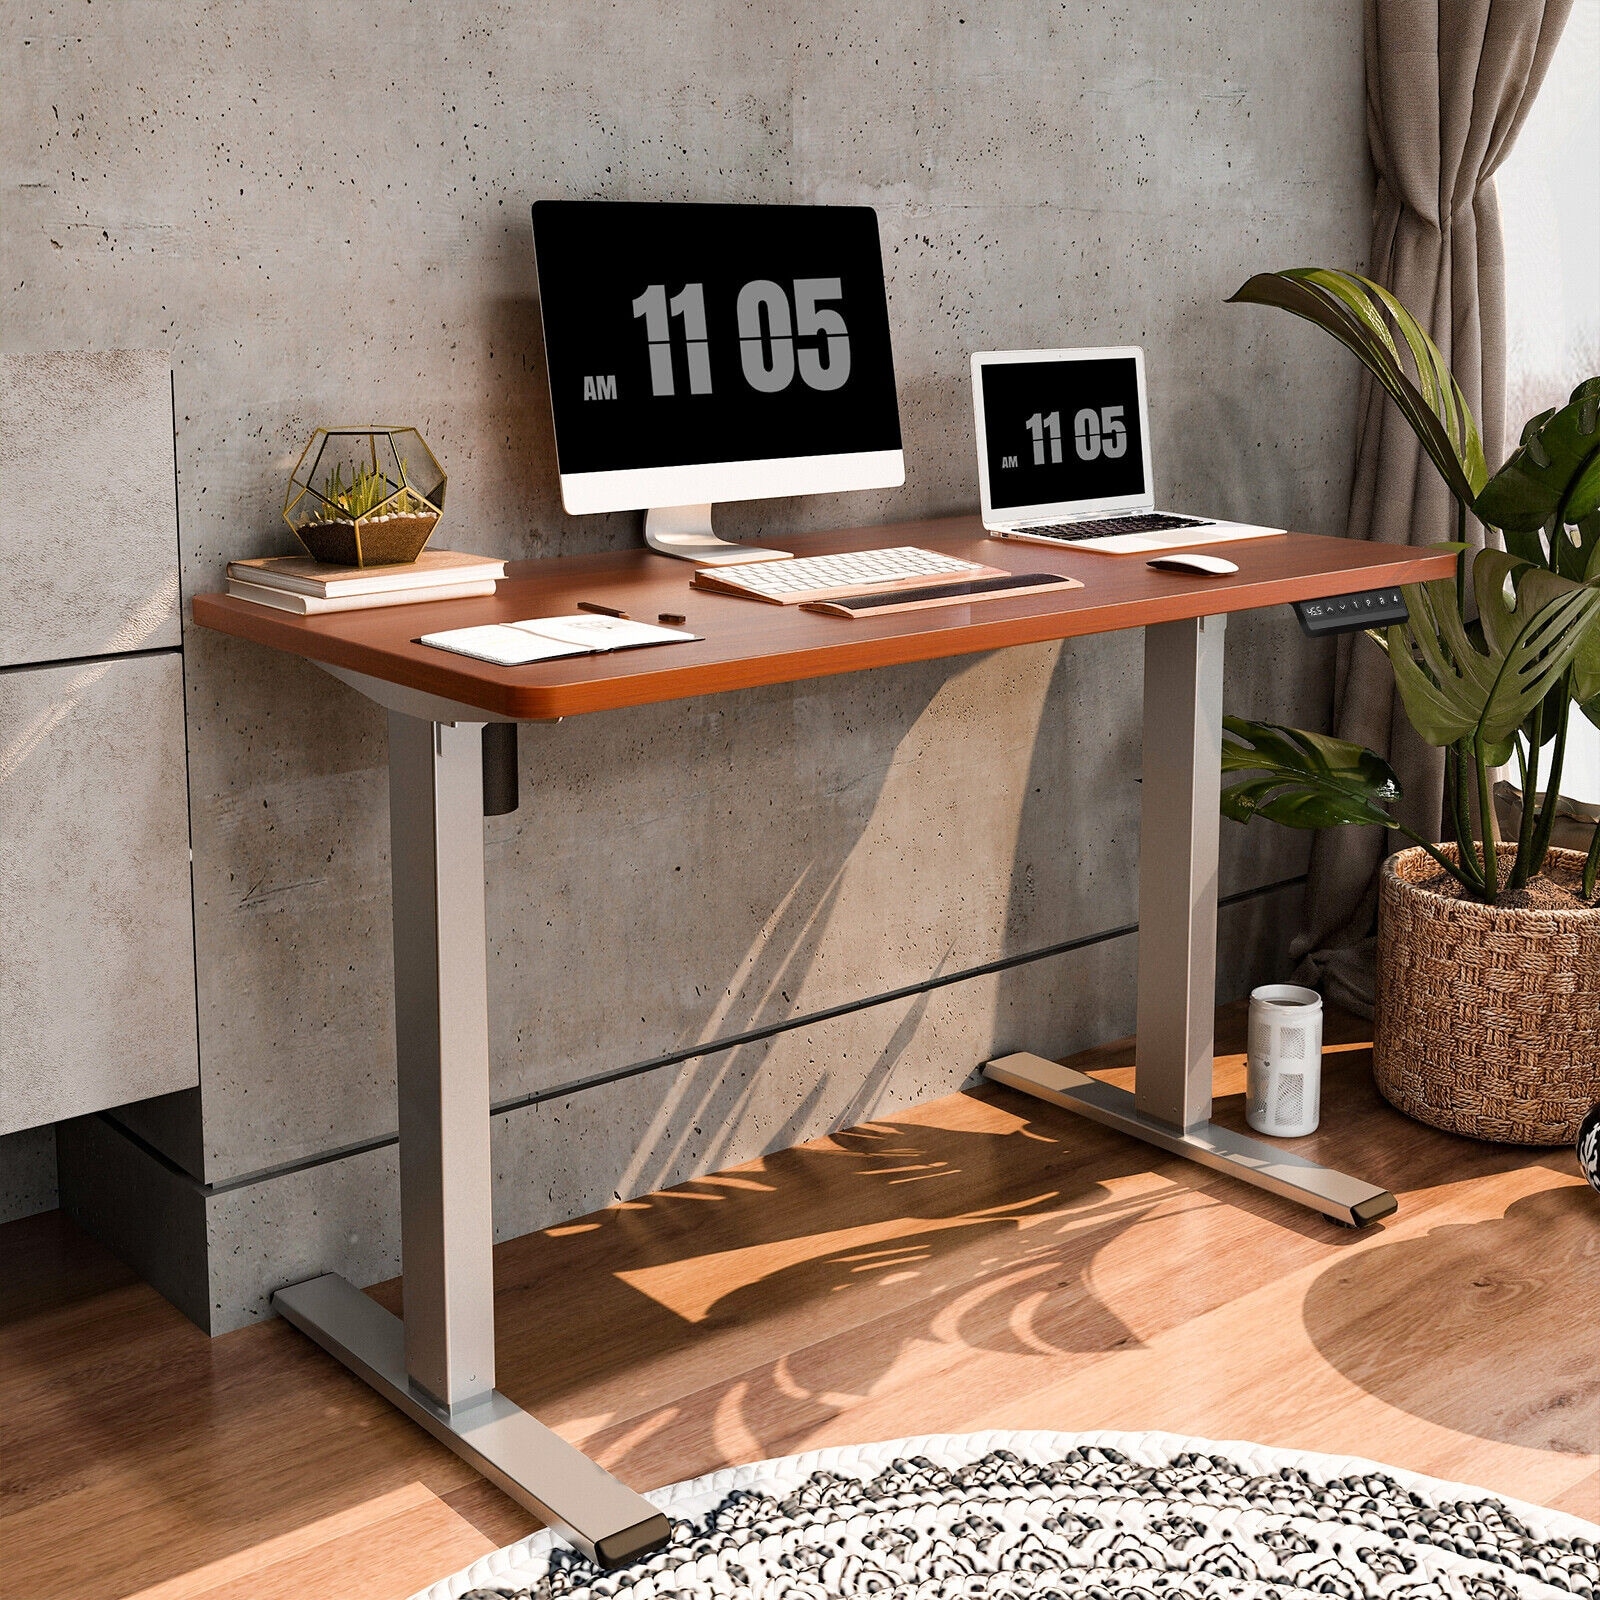 https://ak1.ostkcdn.com/images/products/is/images/direct/3ac95d48cc202bef8db75f740327b4d1e7fca671/FLEXISPOT-Electric-Height-Adjustable-Standing-Desk-48-x-30-Inches-Home-Office-Desk-Whole-Piece-with-Ergonomic-Memory-Controller.jpg